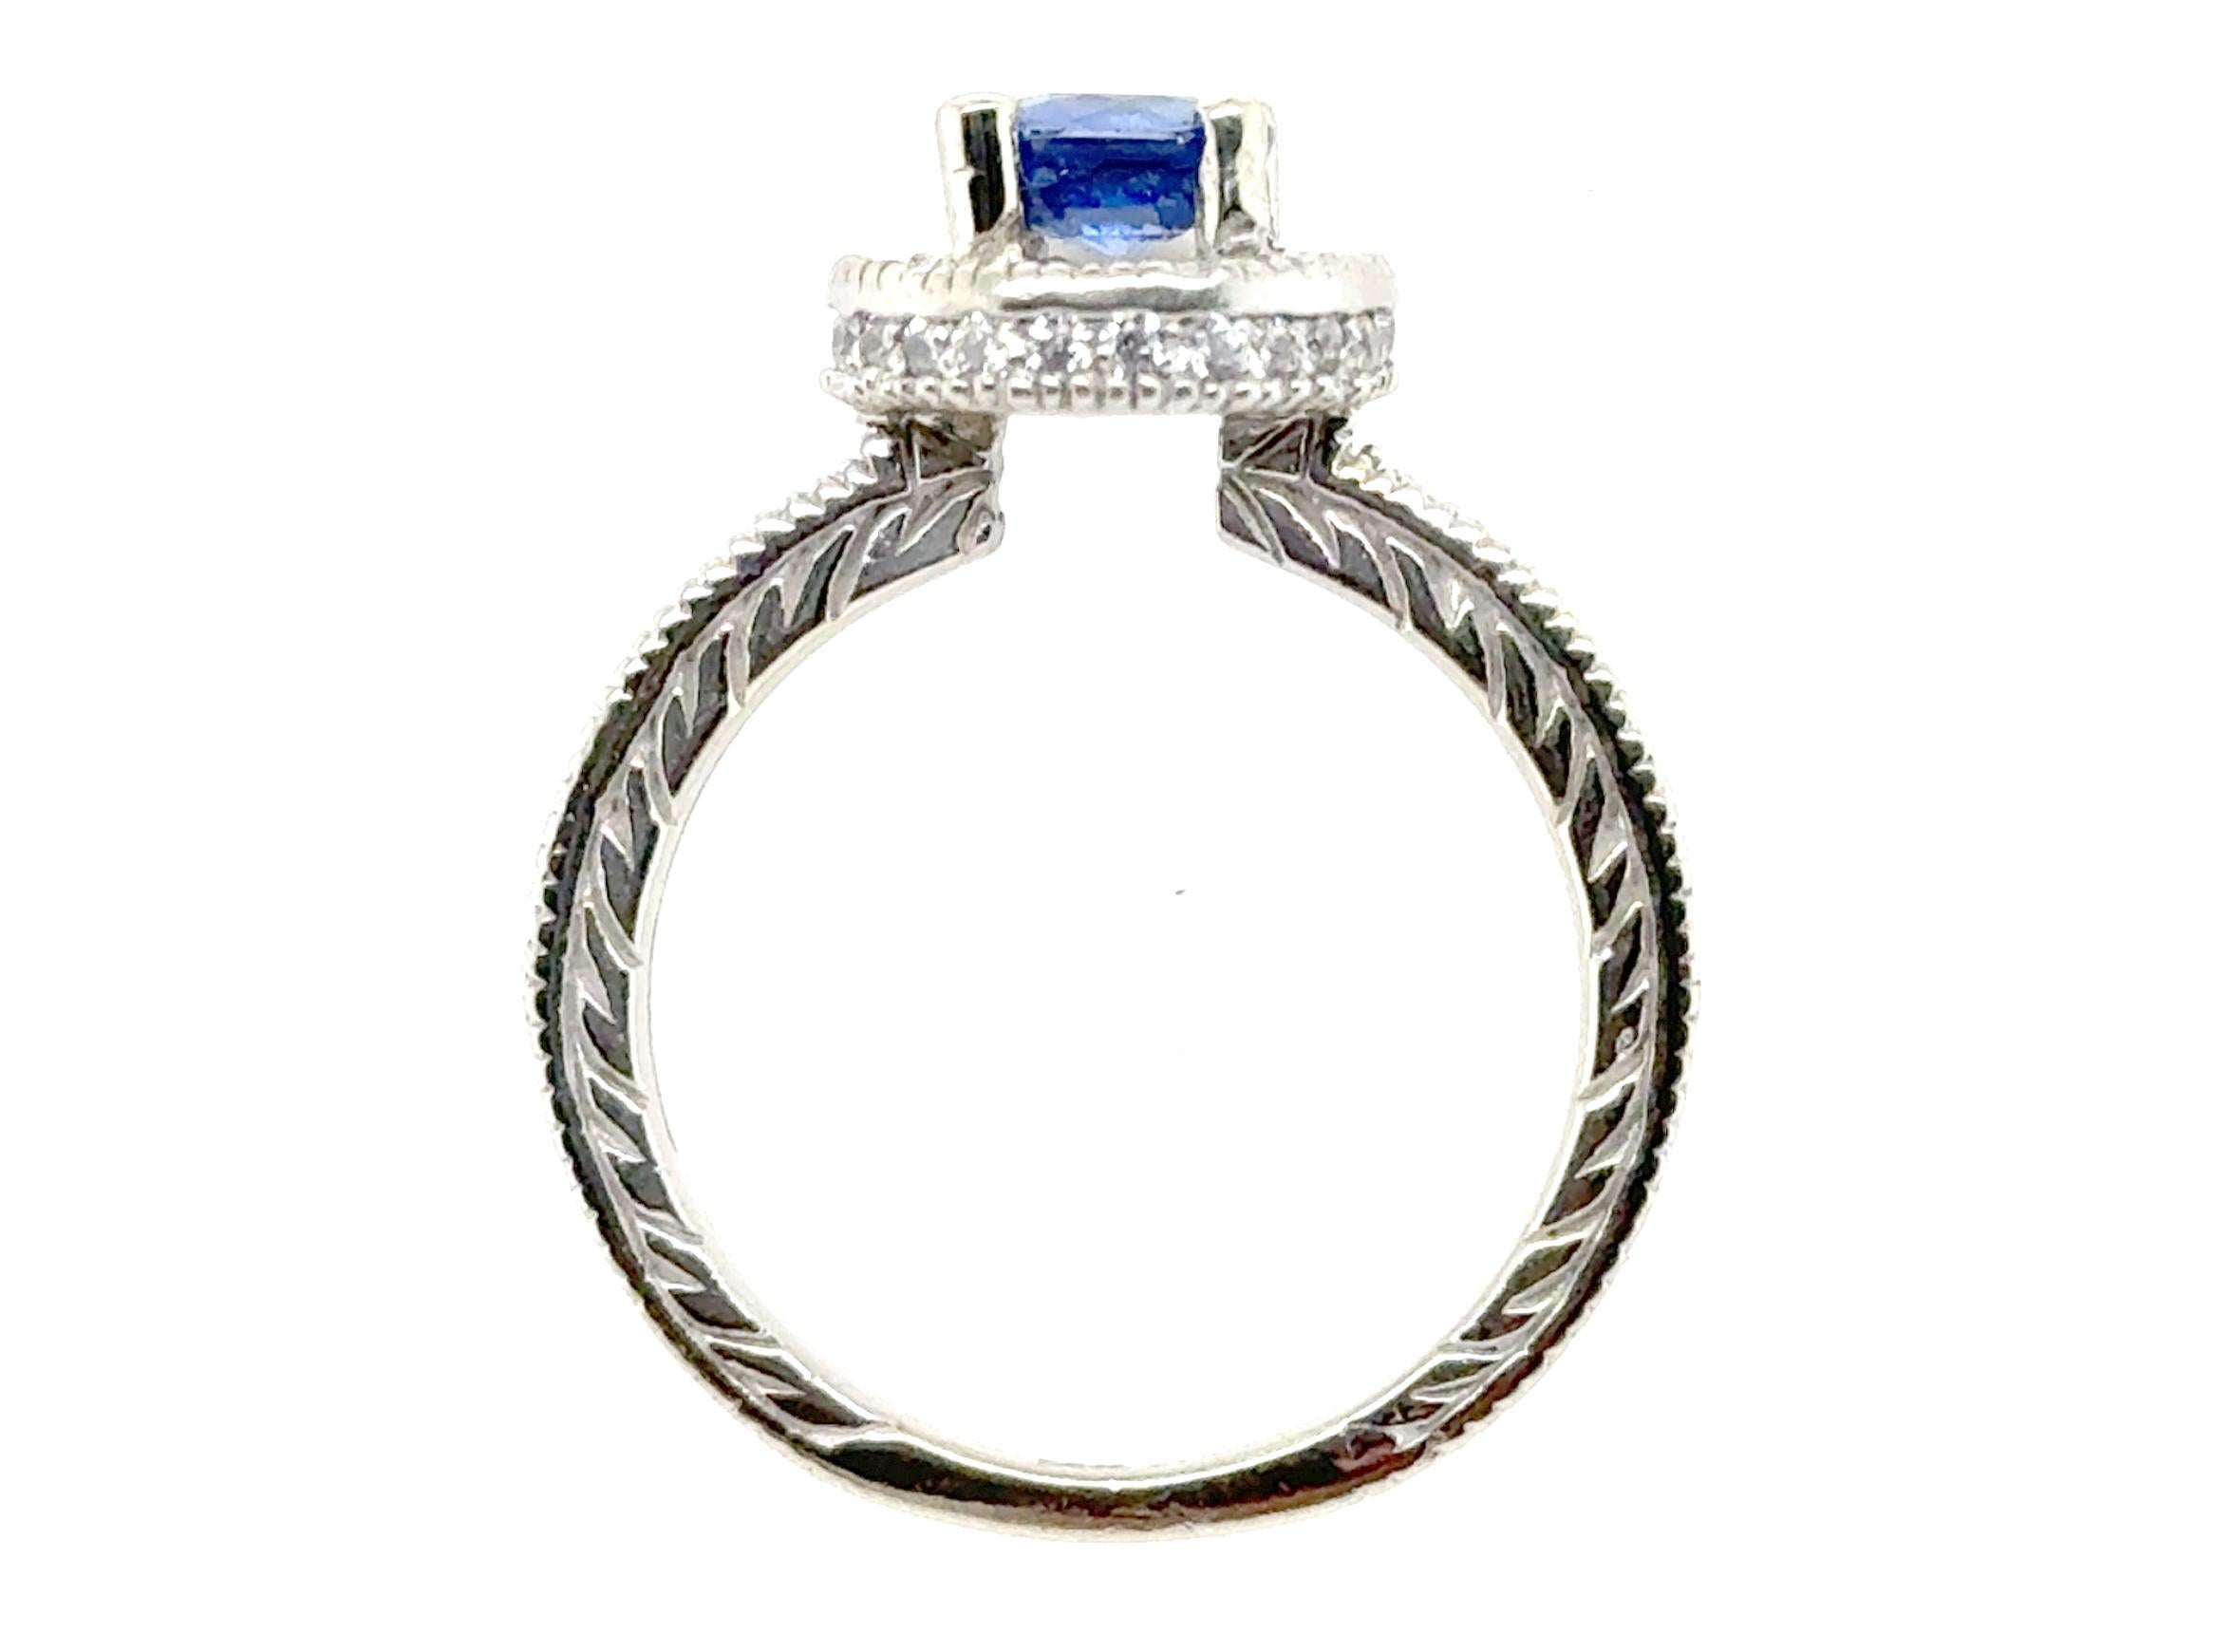 Sapphire Diamond Engagement Ring 1.65ct  14K White Gold 


Featuring a Natural 1.00 Carat Round Cut Blue Sapphire

Weighs 4.5 Grams

That's Over $190 in Gold Value Alone

Incredible Engraved Details All Down the Shank

Gorgeous Double Halo